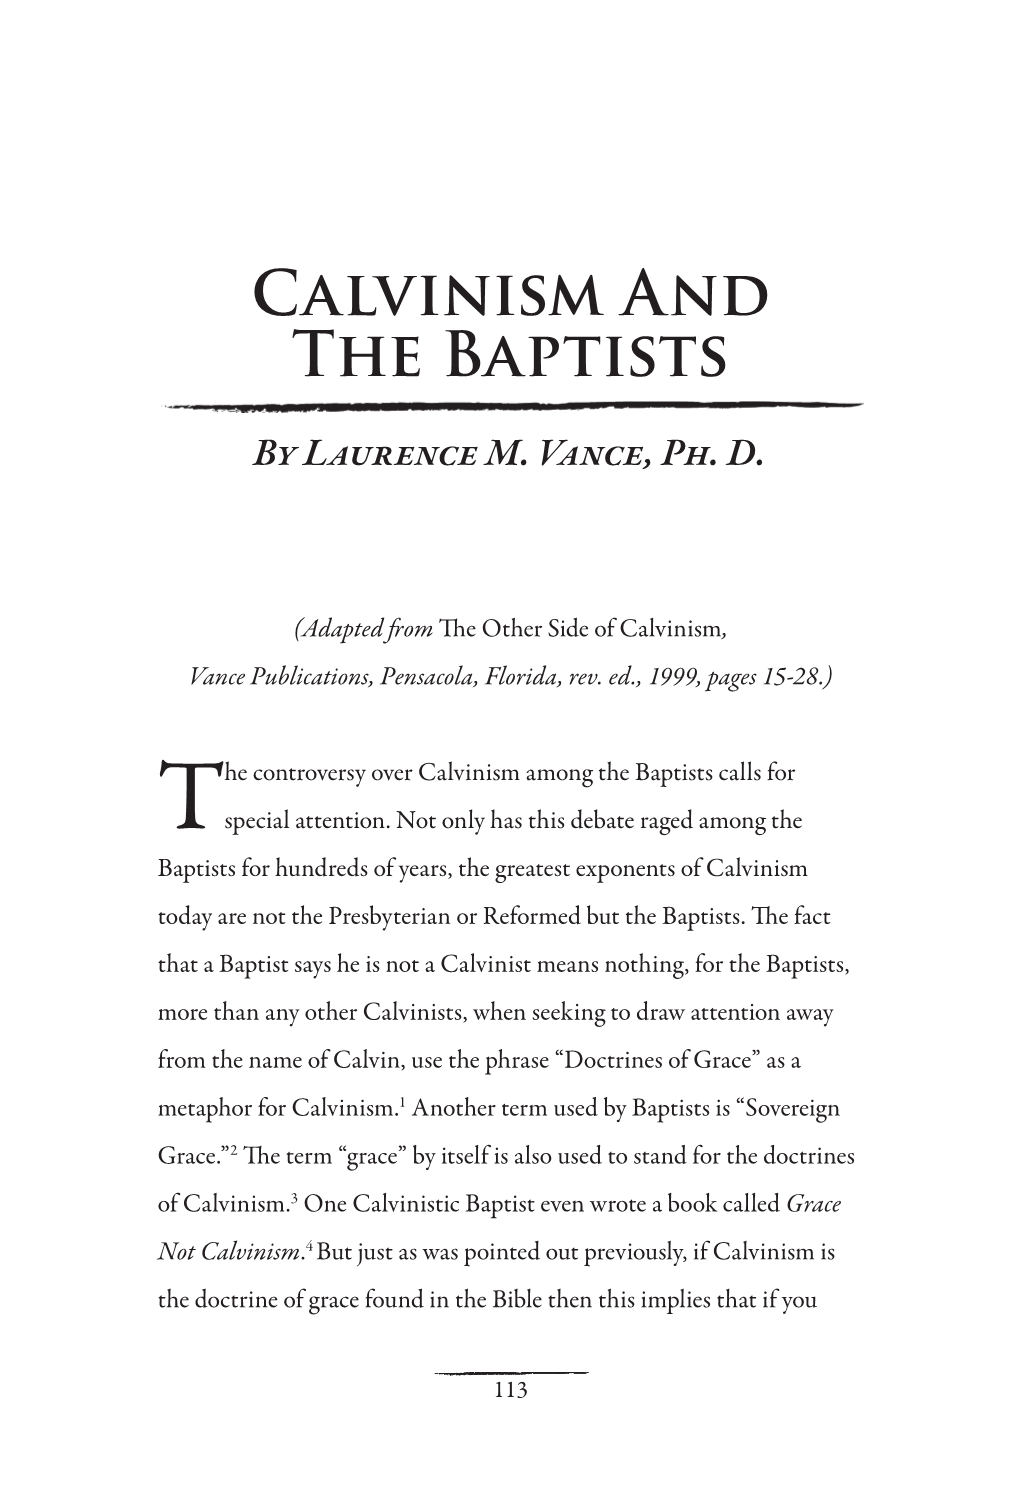 Calvinism and the Baptists